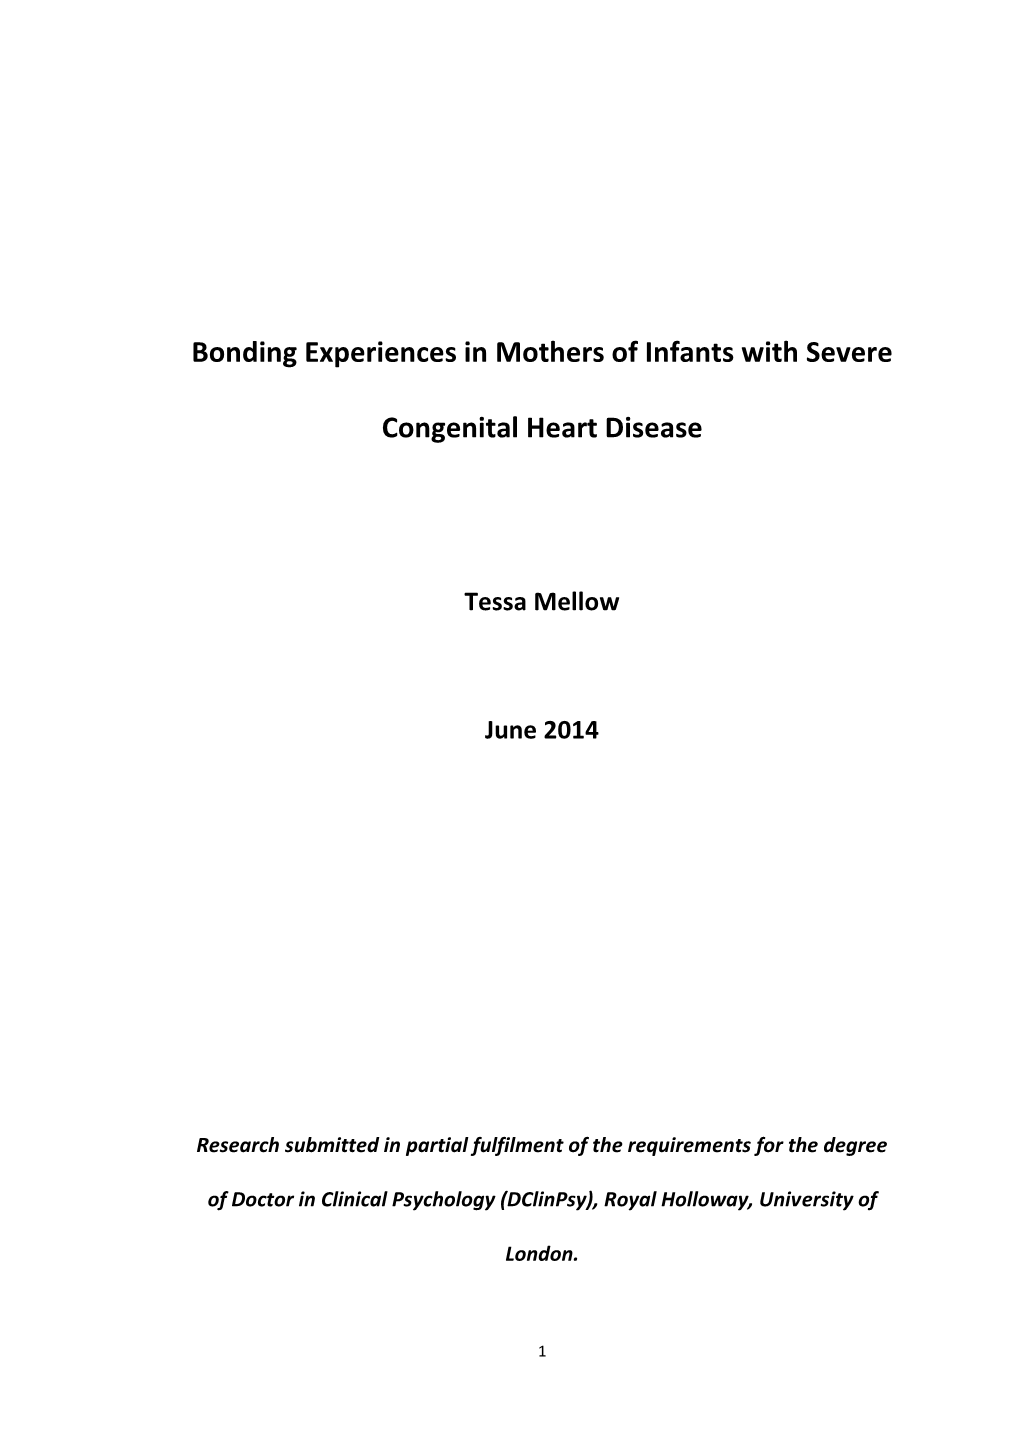 Bonding Experiences in Mothers of Infants with Severe Congenital Heart Disease Research Project